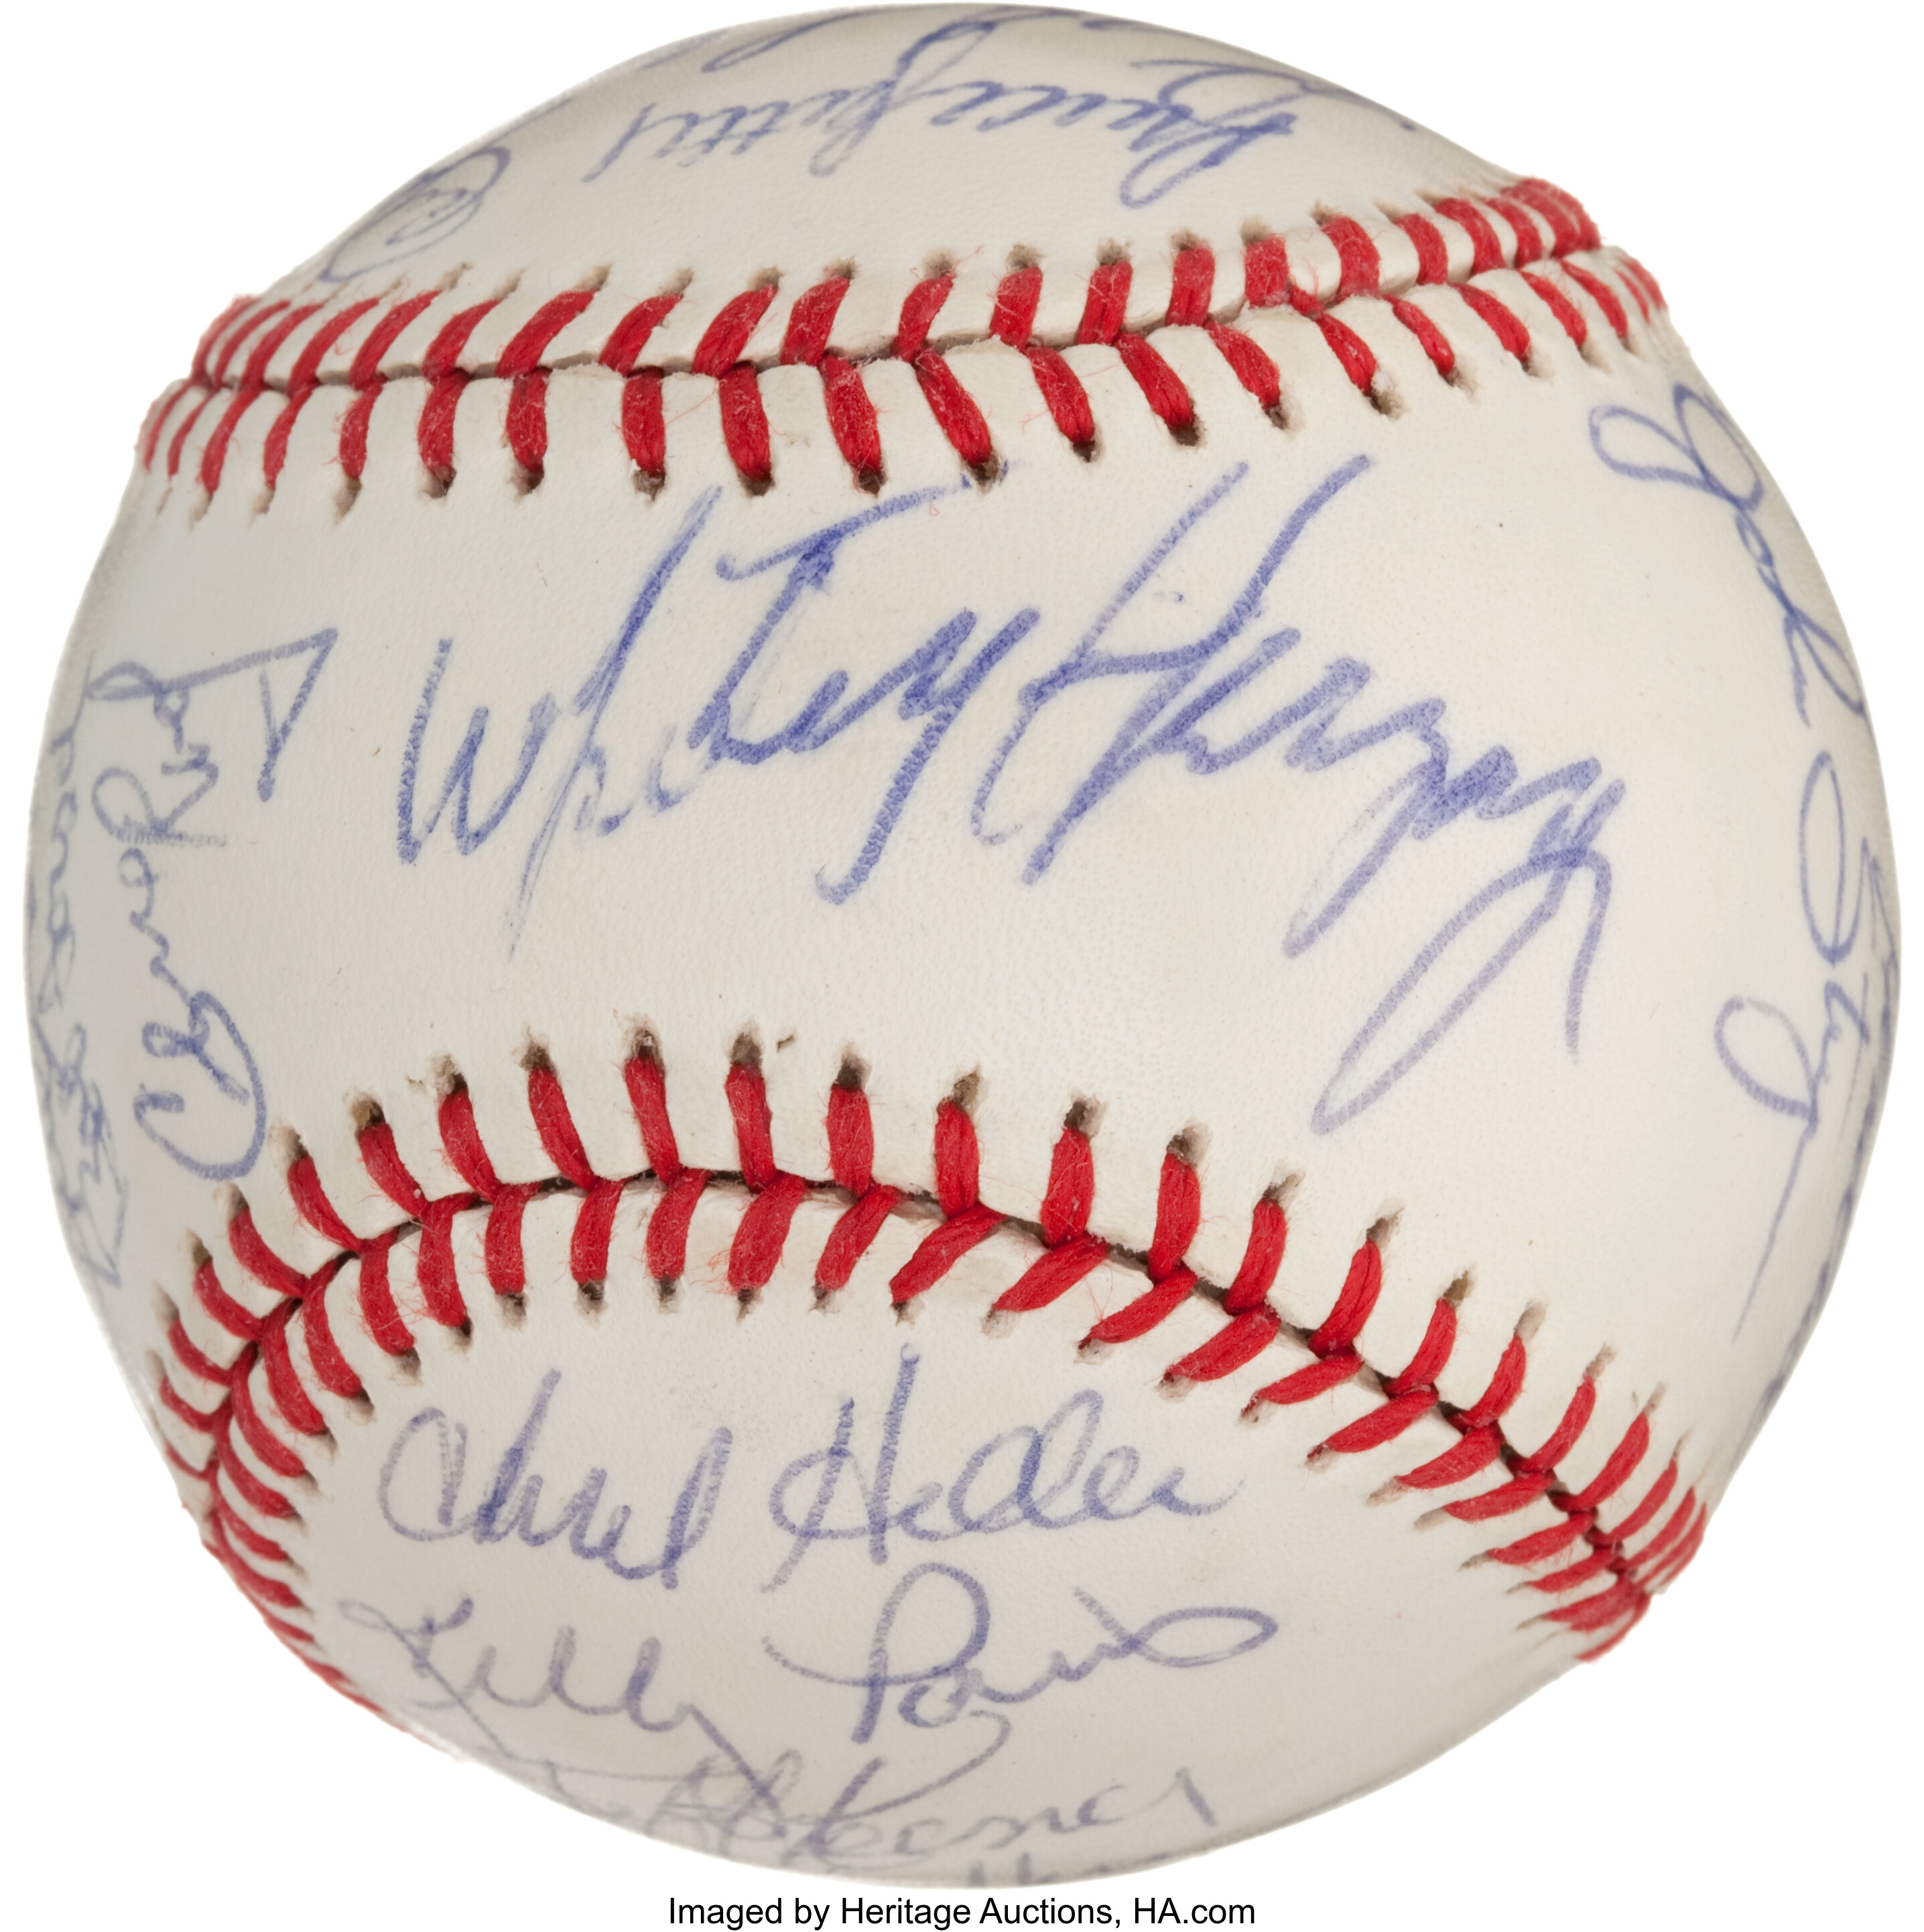 1982 St. Louis Cardinals Team Signed Baseball (26 Signatures) - | Lot #43099 | Heritage Auctions